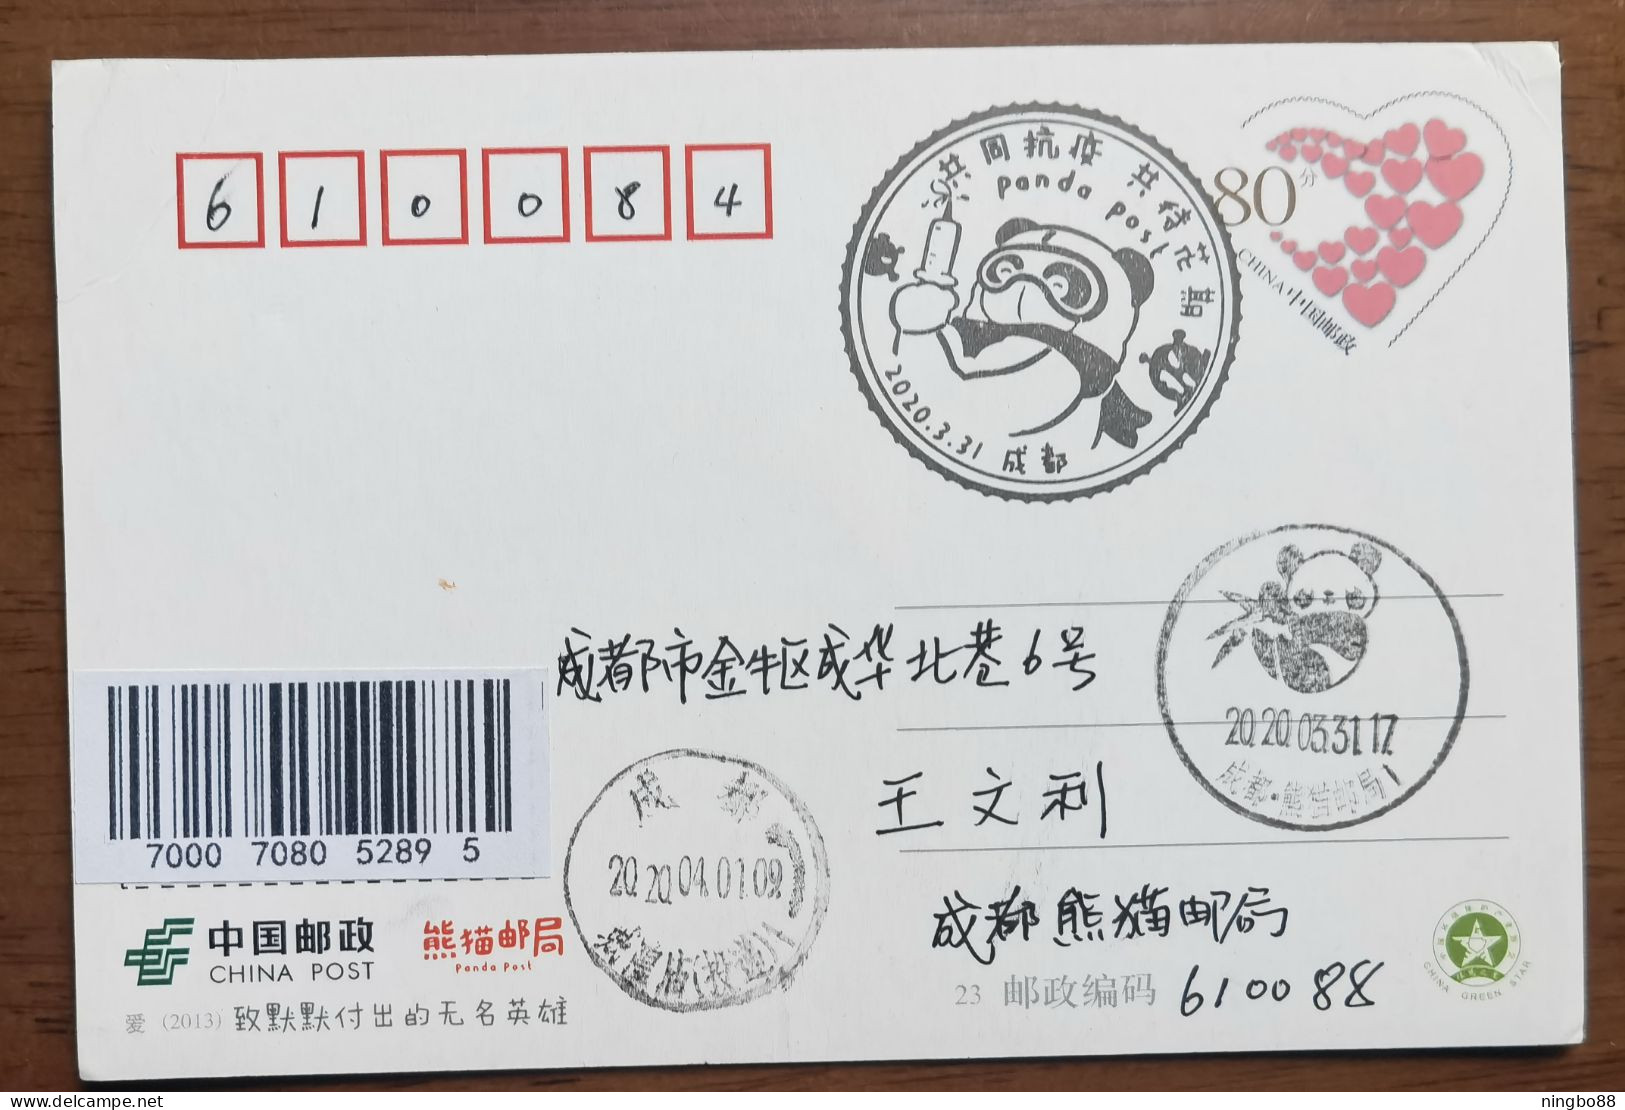 Best Wishes & Encourage,China 2020 Chengdu Giant Panda Post Office Fighting COVID-19 Pandemic Advert Pre-stamped Card - Maladies